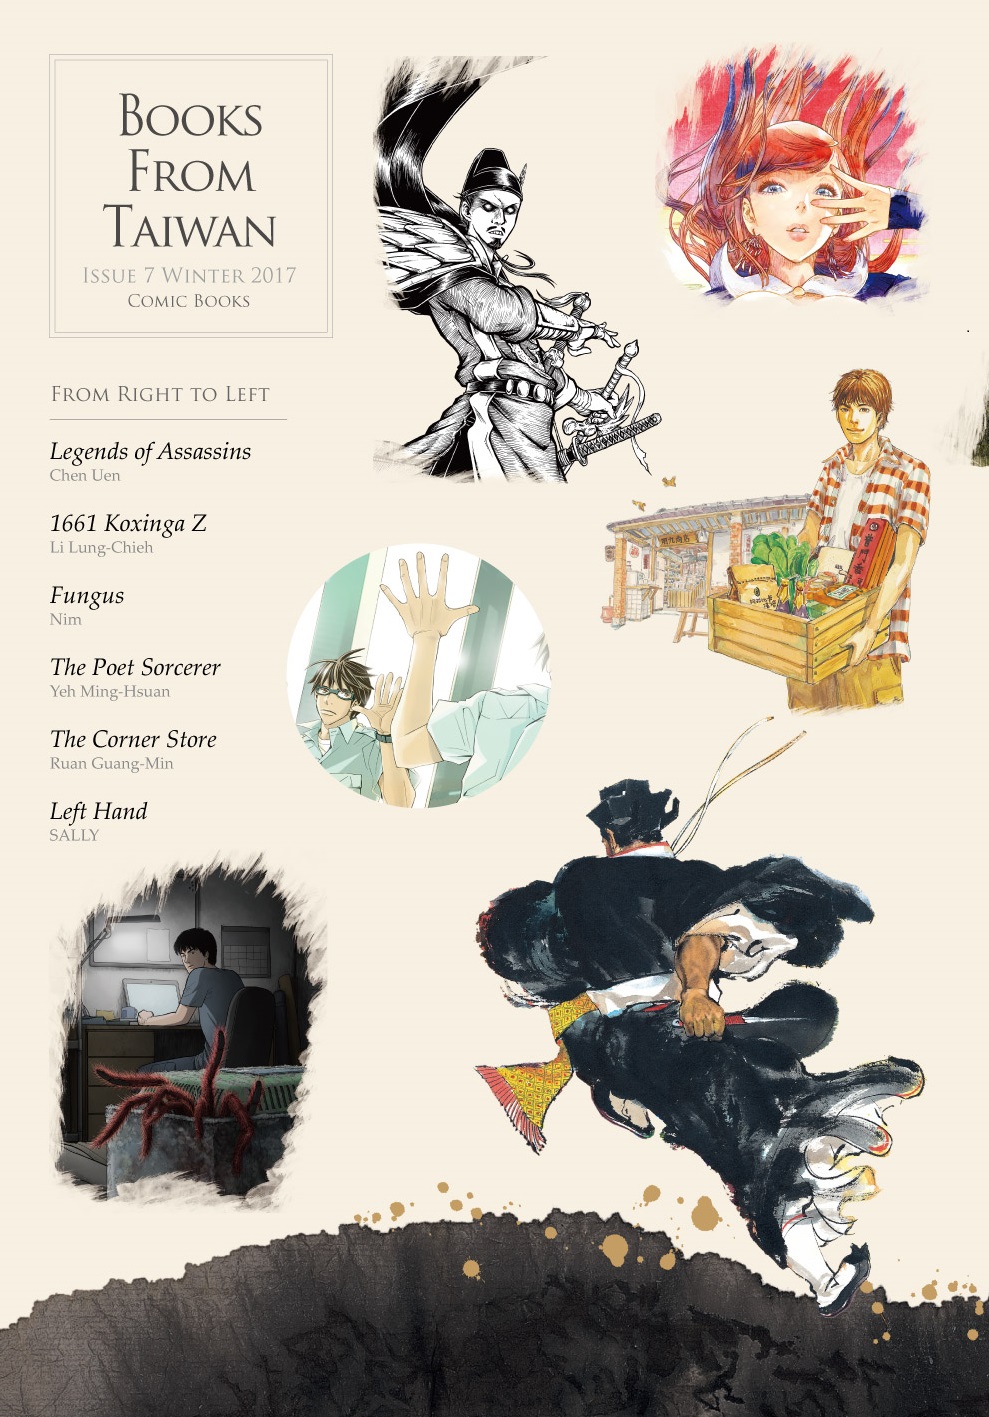 Books from Taiwan Issue 7 Comics